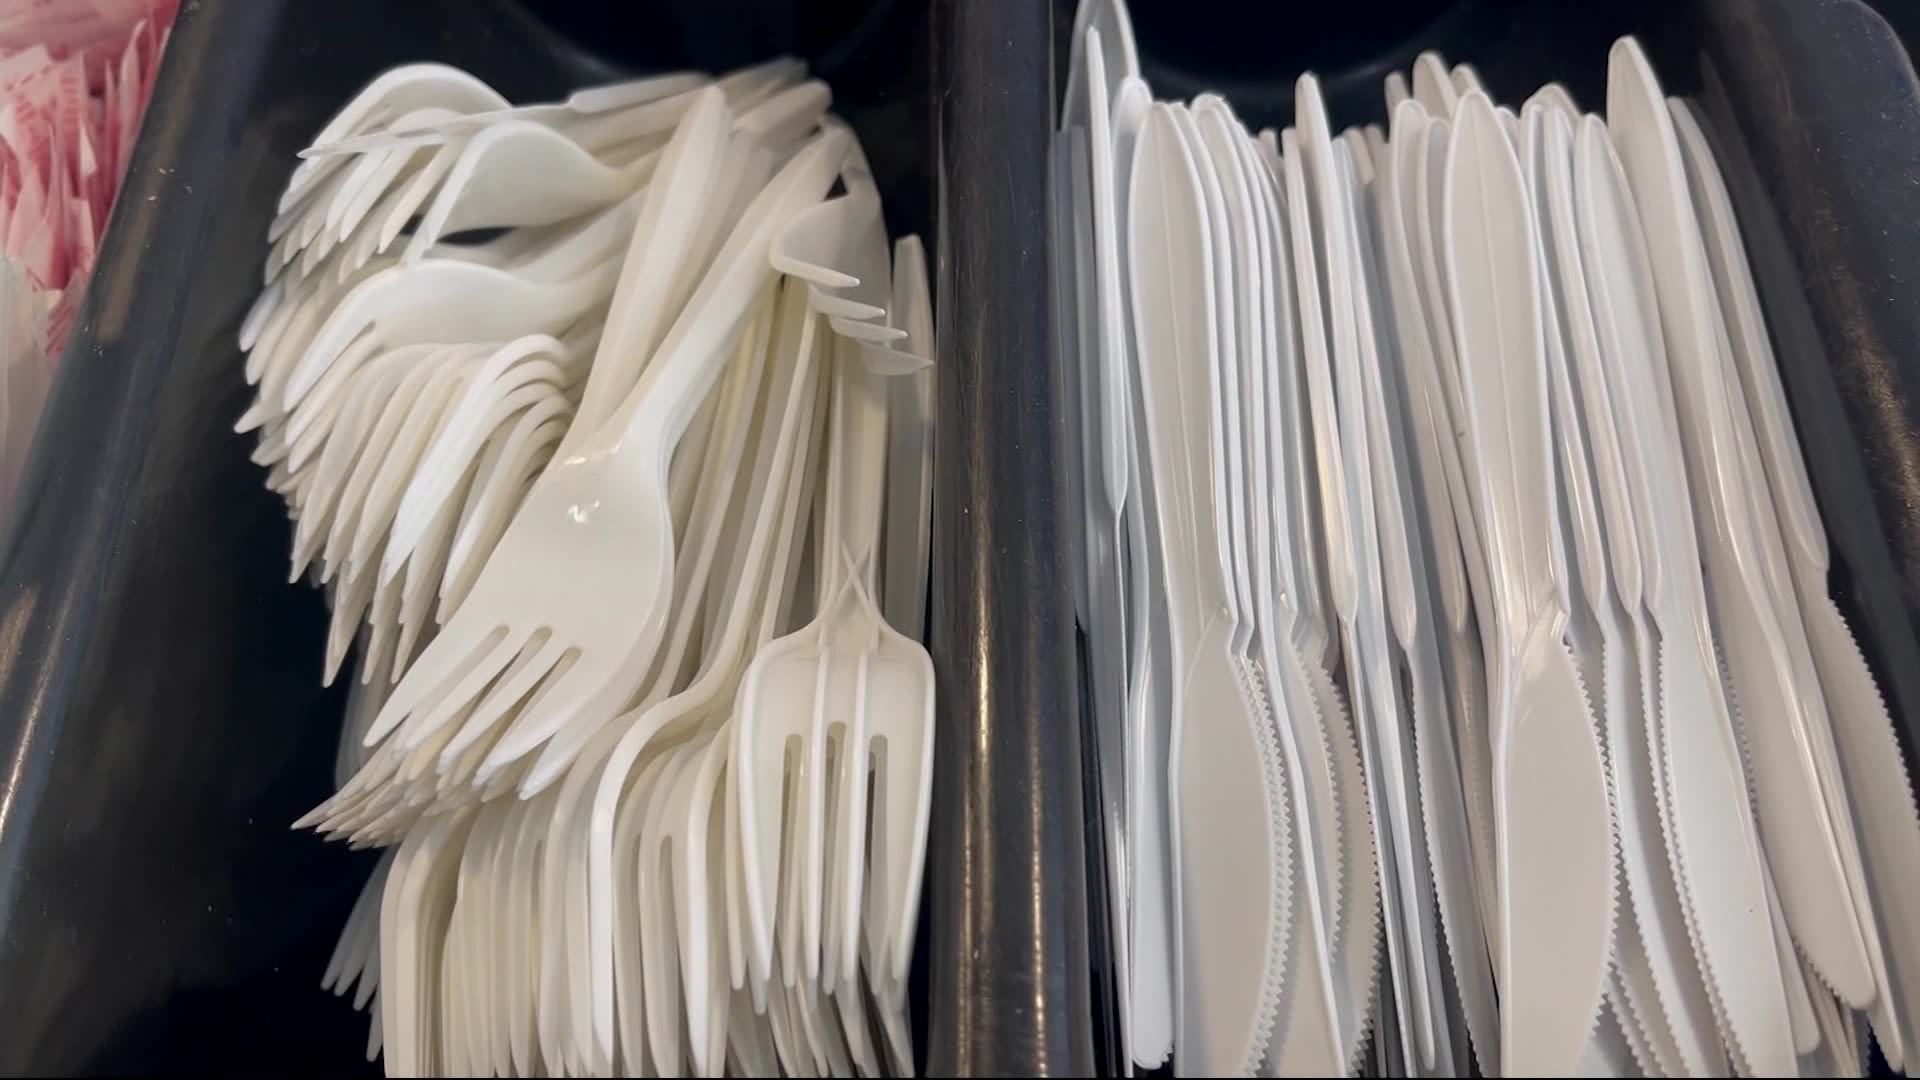 NYC restaurants won't be able to include plastic utensils with some orders  under new law